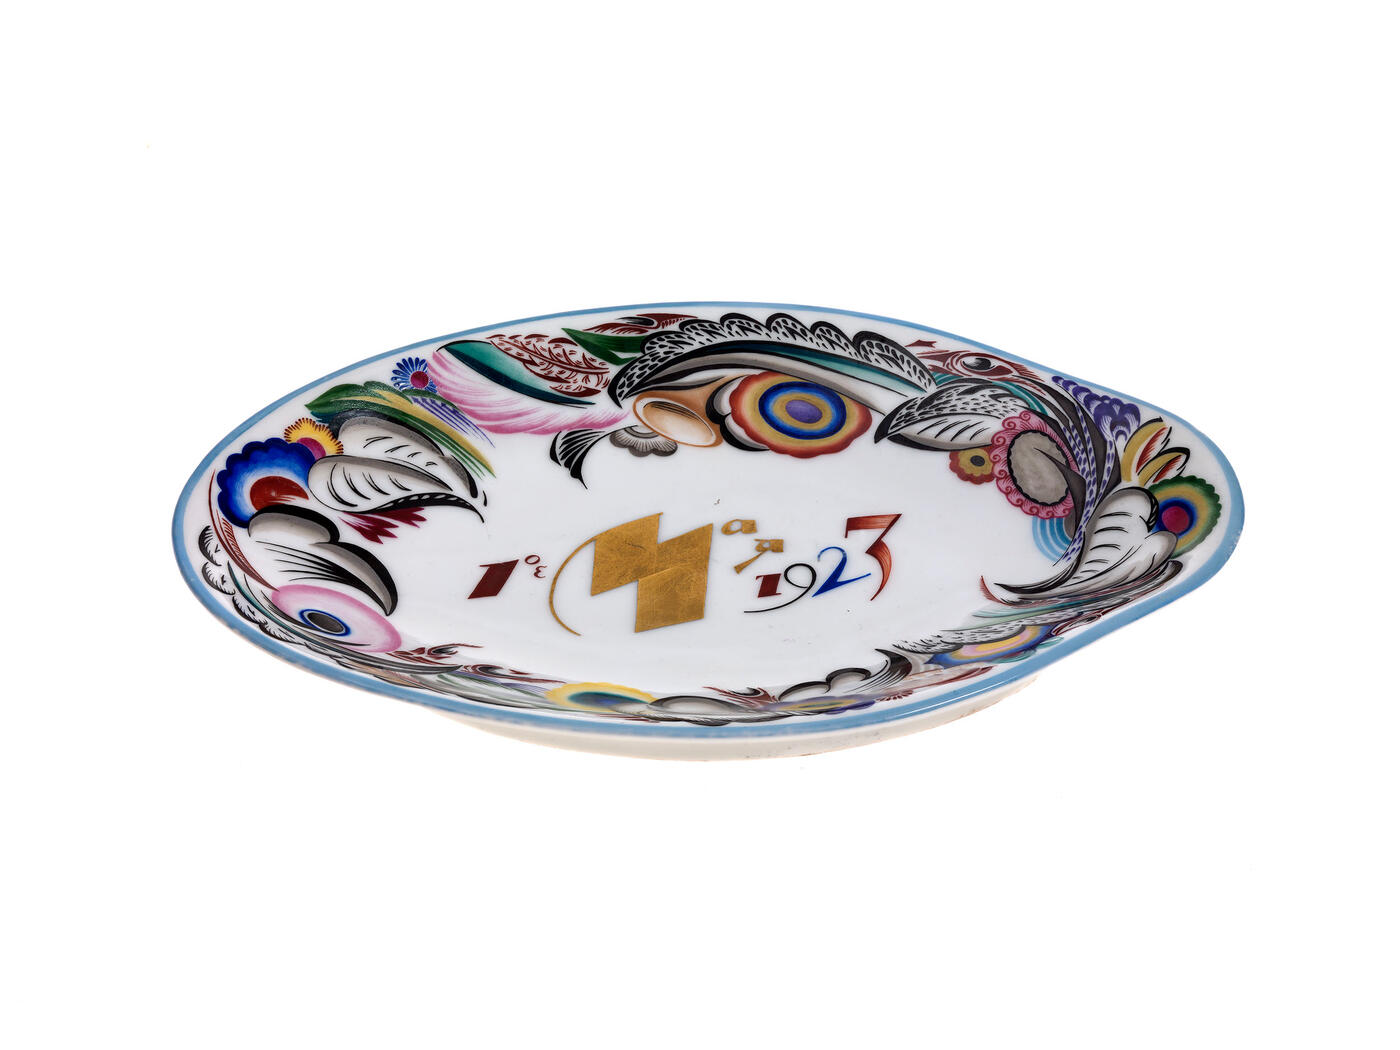 AFTER A PAINTED DESIGN BY RUDOLPH VILDE, STATE PORCELAIN MANUFACTORY, PETROGRAD, 1923–1924